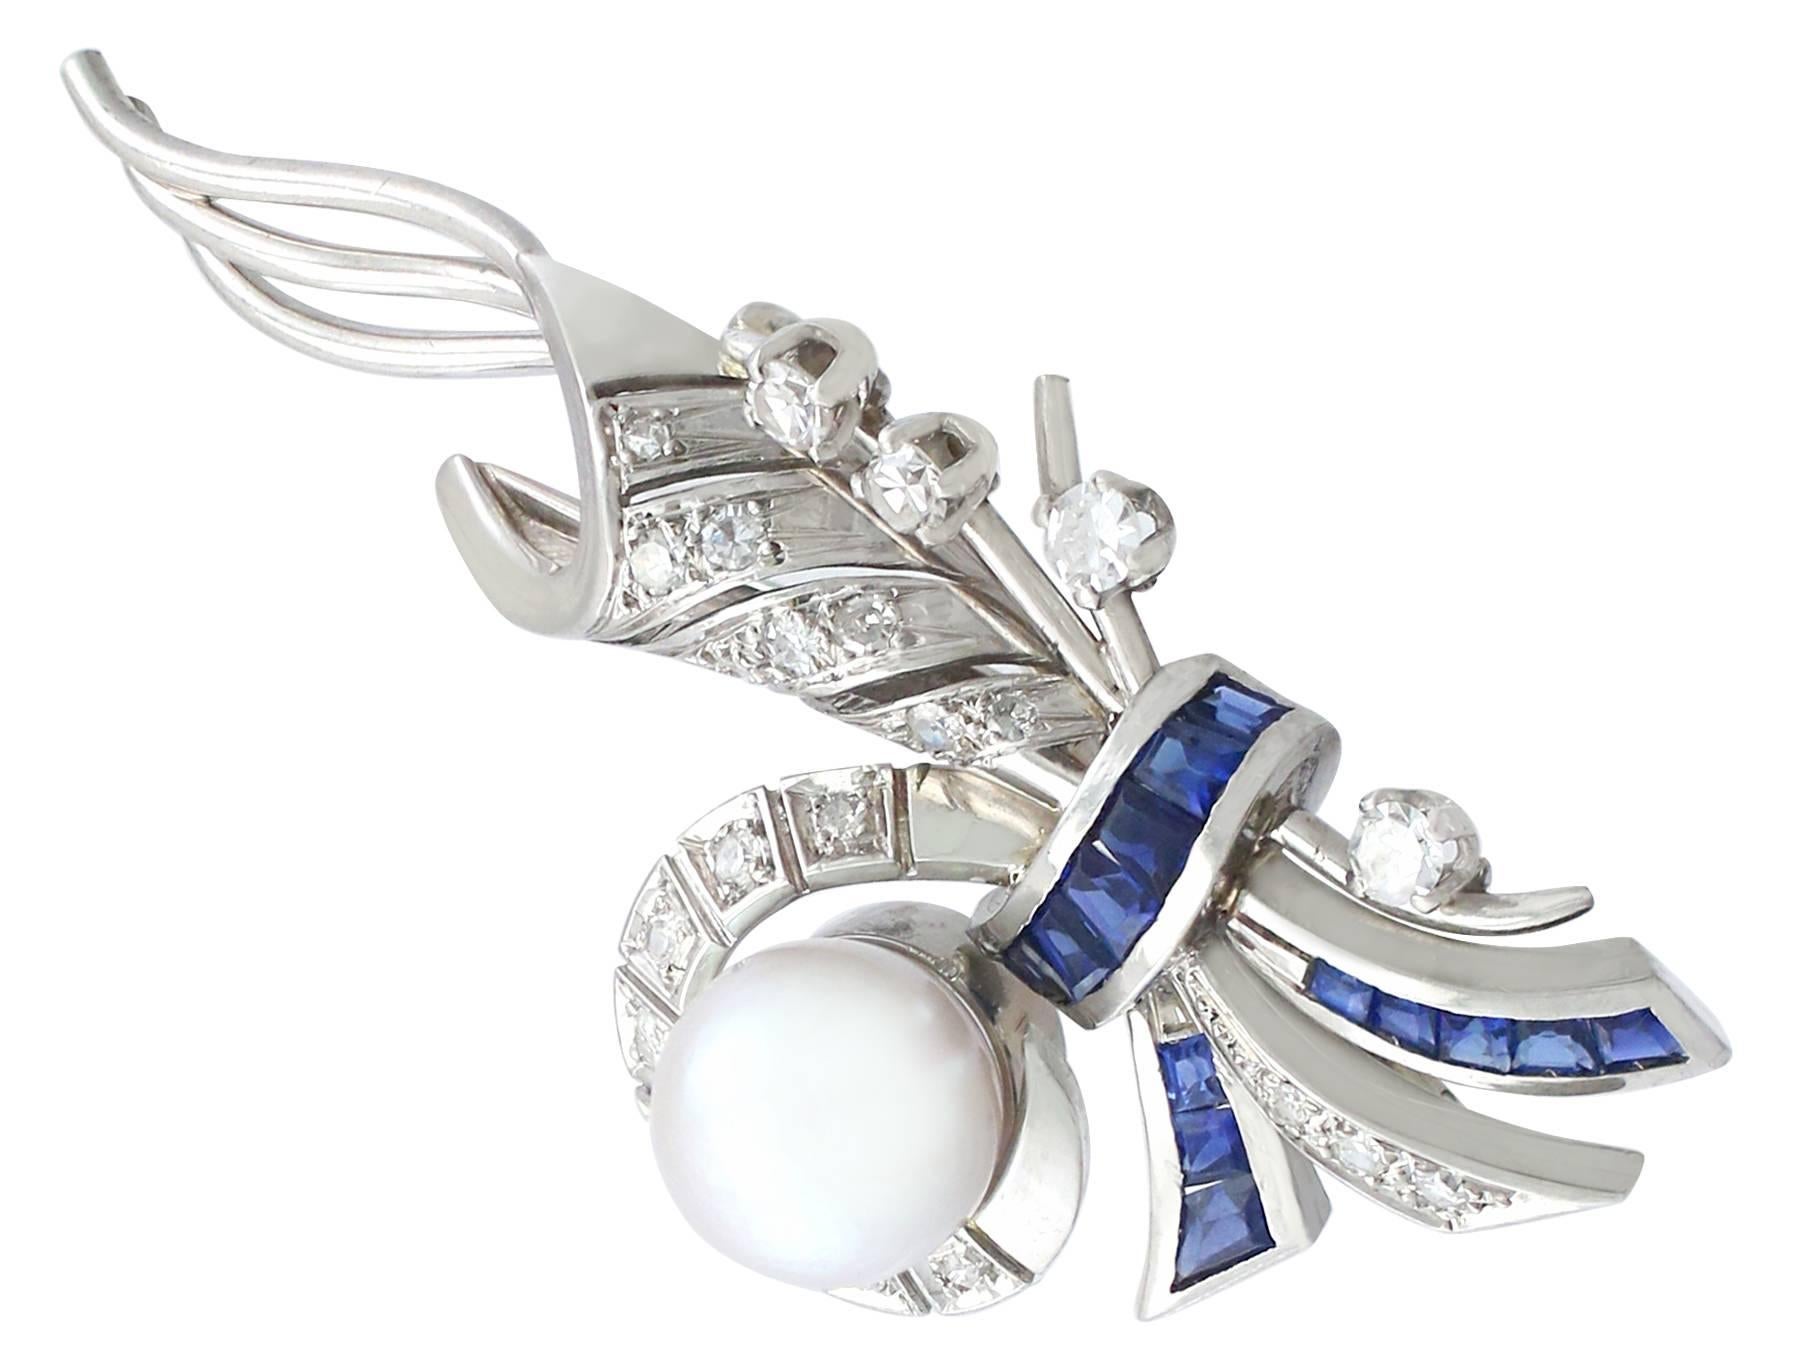 A stunning vintage French 0.84 Ct sapphire and 0.77 Ct diamond, cultured pearl and platinum spray brooch with a 18k white gold pin; part of our diverse vintage jewelry collections.

This stunning, fine and impressive diamond, pearl and sapphire